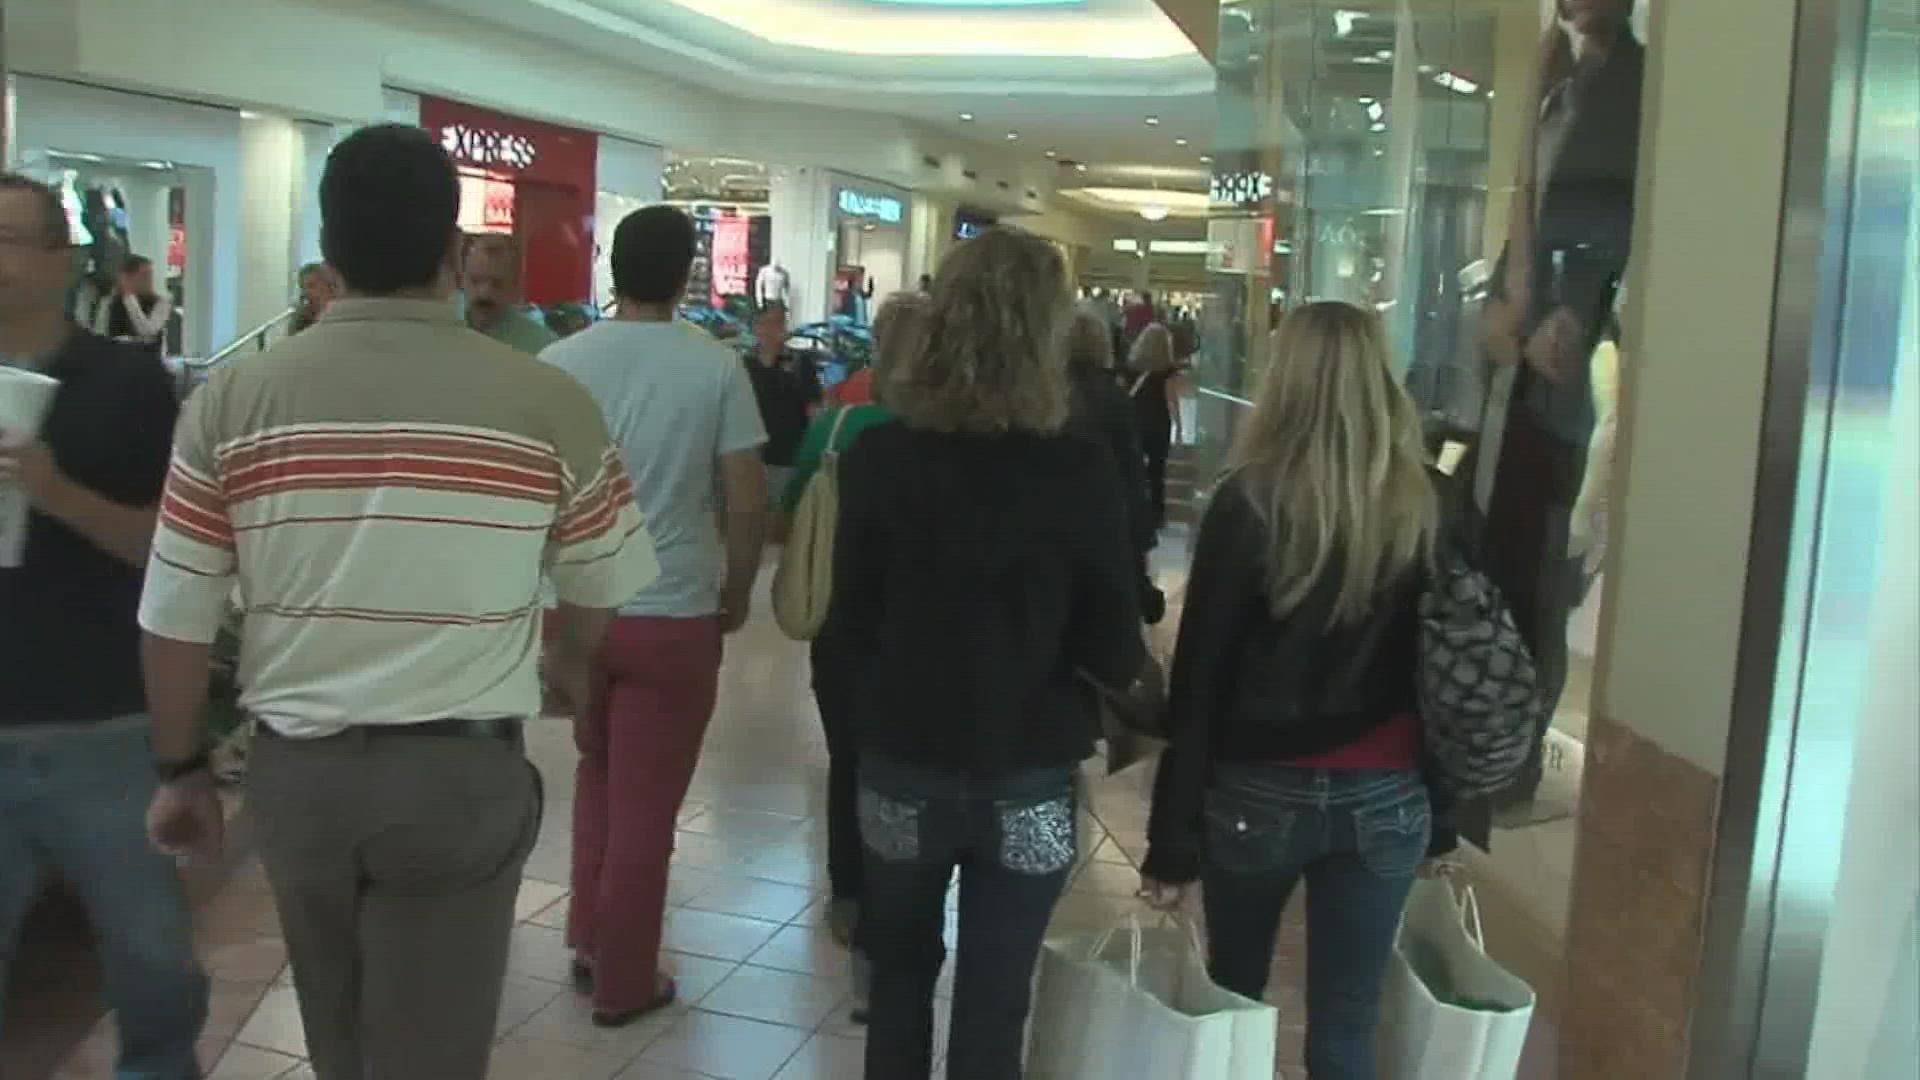 As prices continue to rise, a recent consumer survey suggests some people are cutting back their spending.